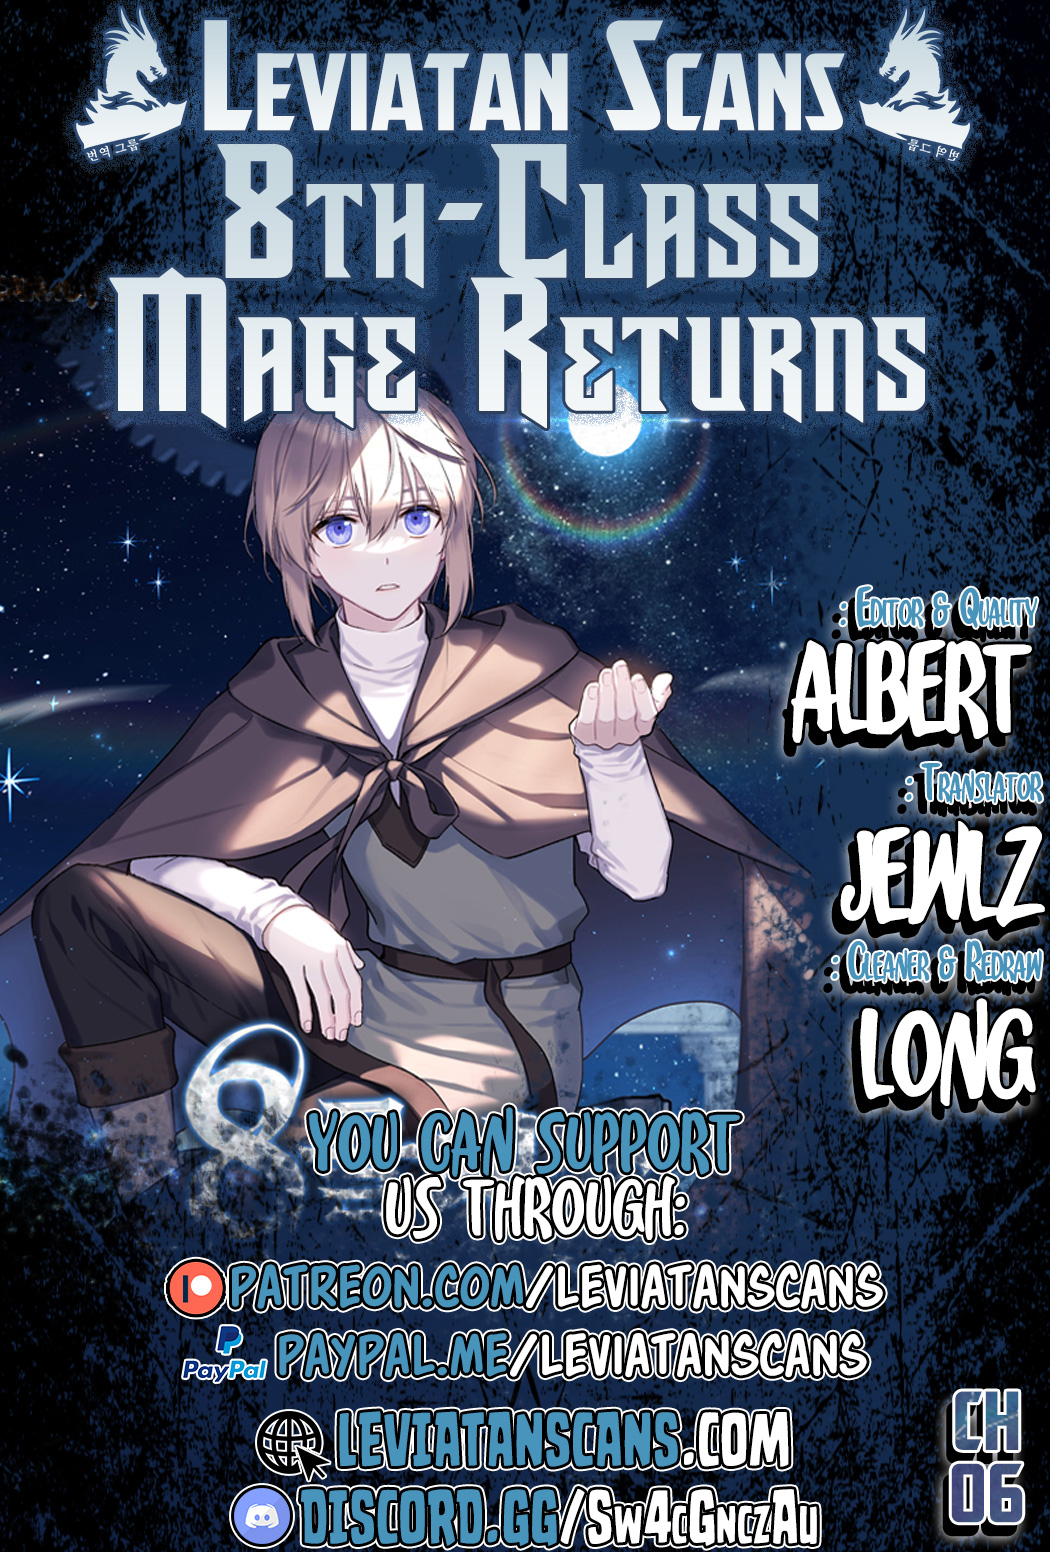 Return of the 8th Class Magician - Chapter 7125 - Image 1